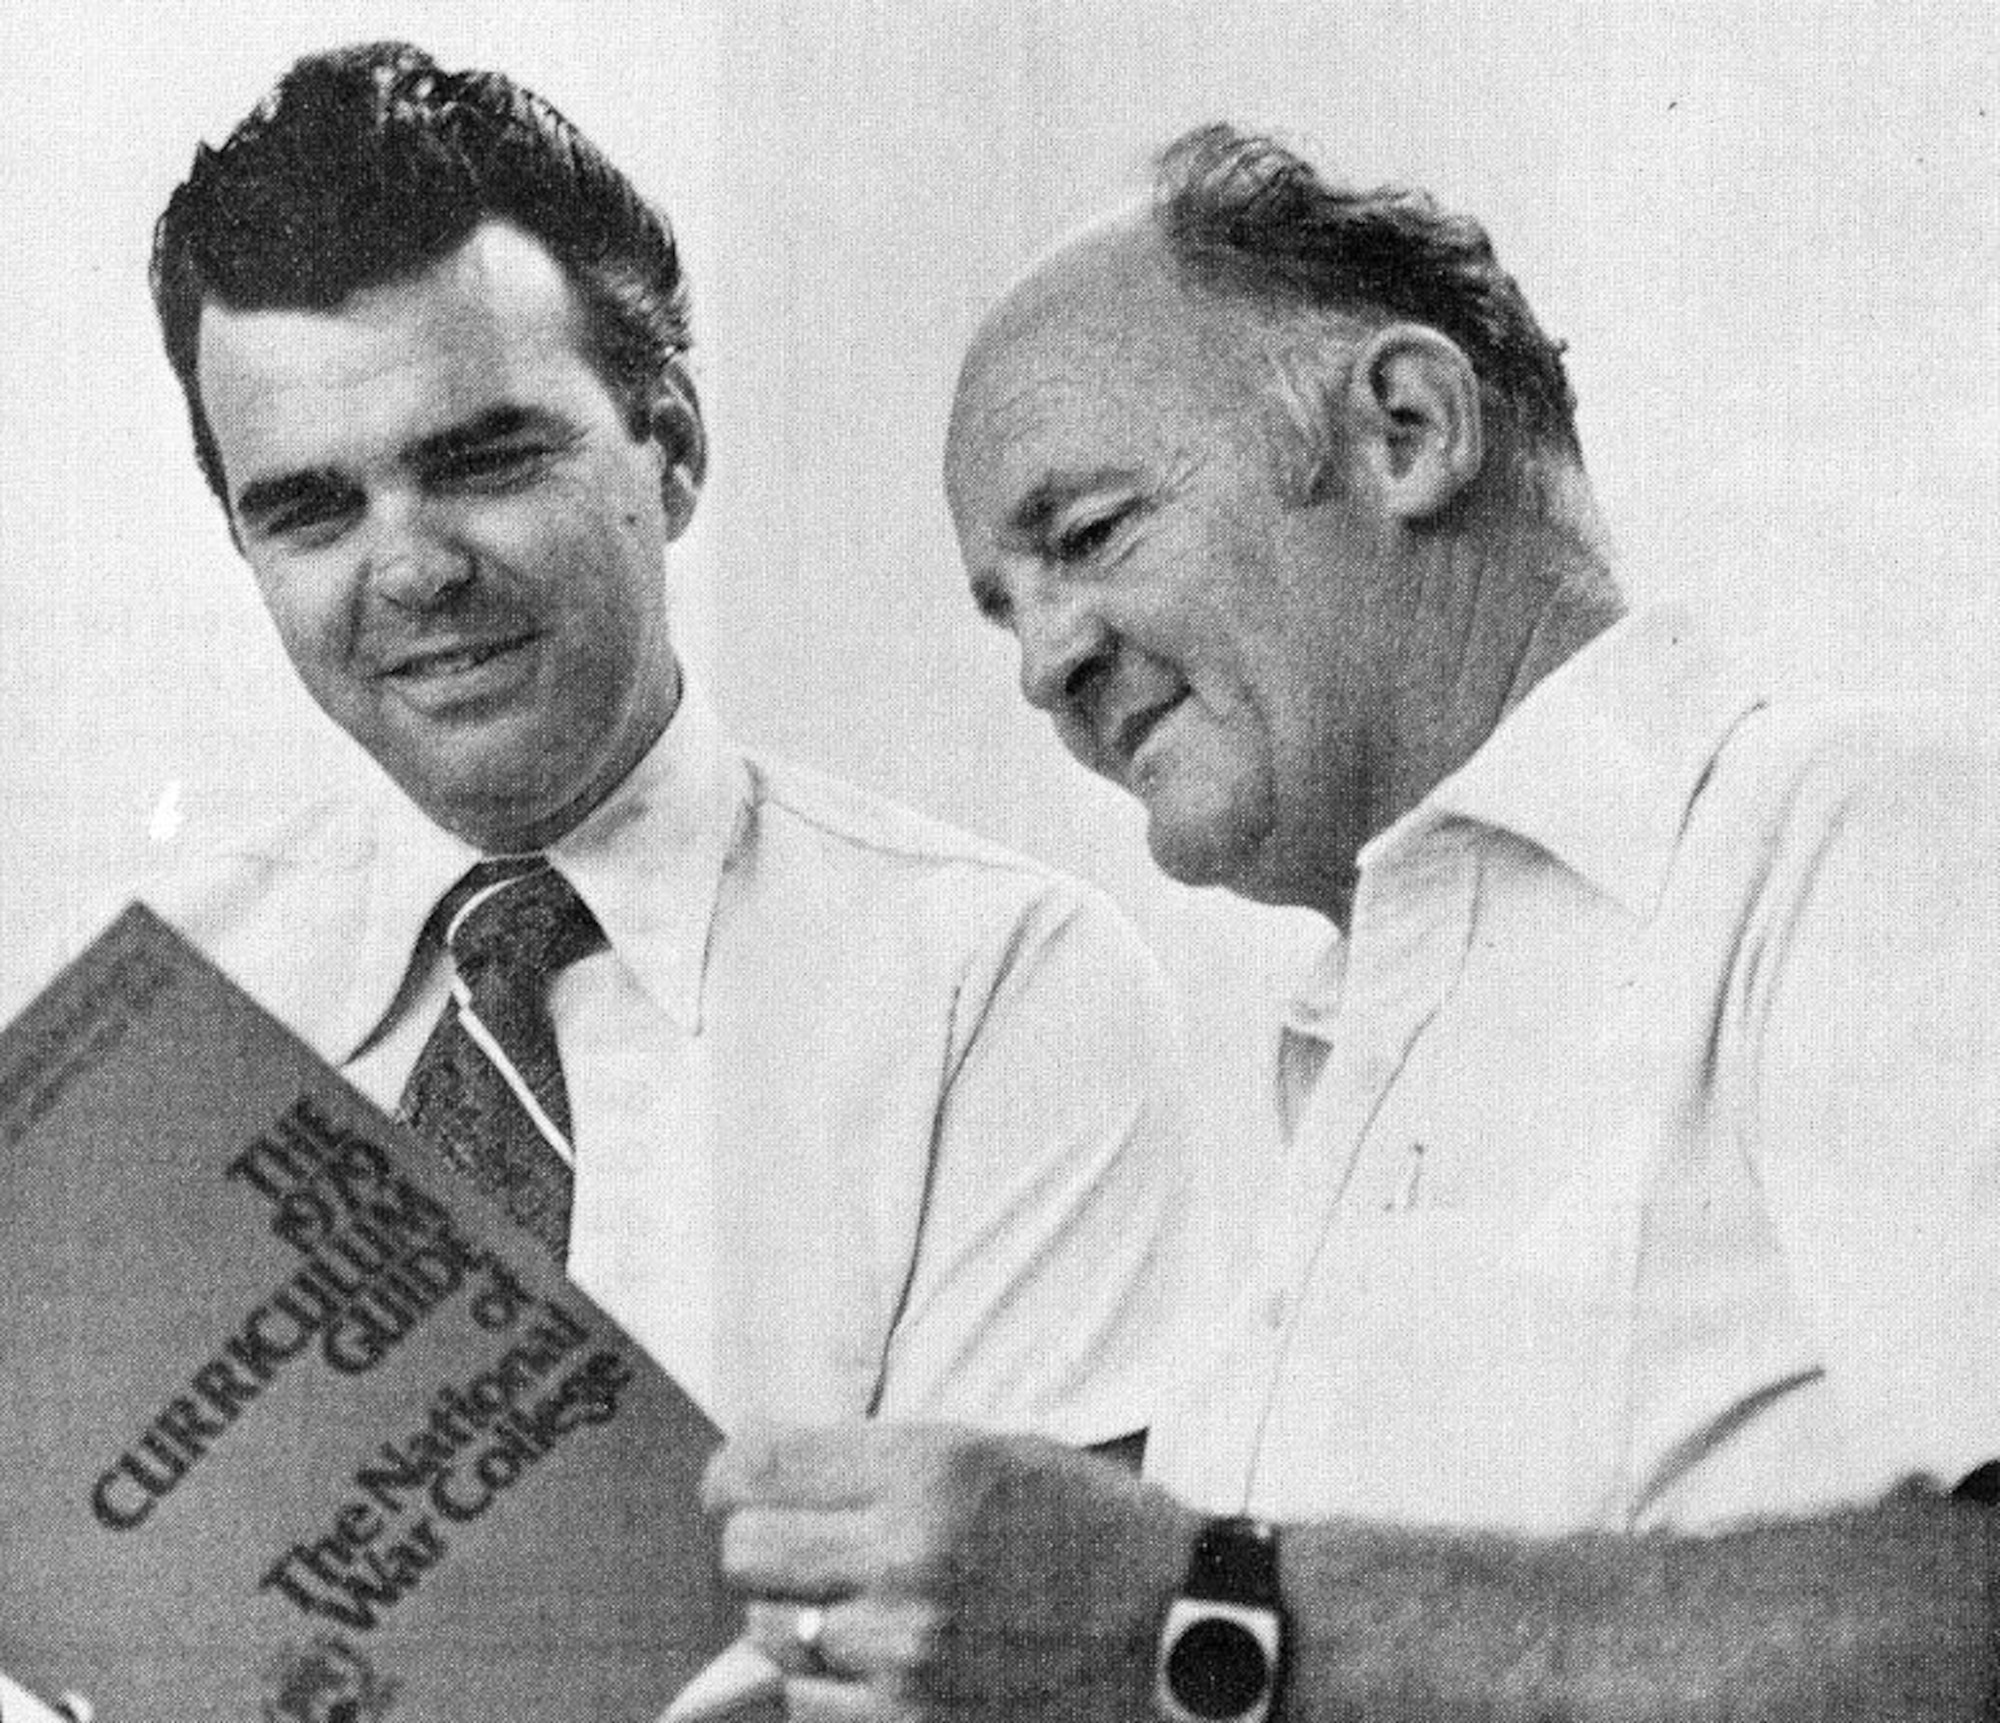 Dale Bradley, left, and Dick Austin, both employed at Arnold Air Force Base, Tenn., look over the curriculum of the National War College in Washington, D.C., in the late 1970s. (U.S. Air Force photo)